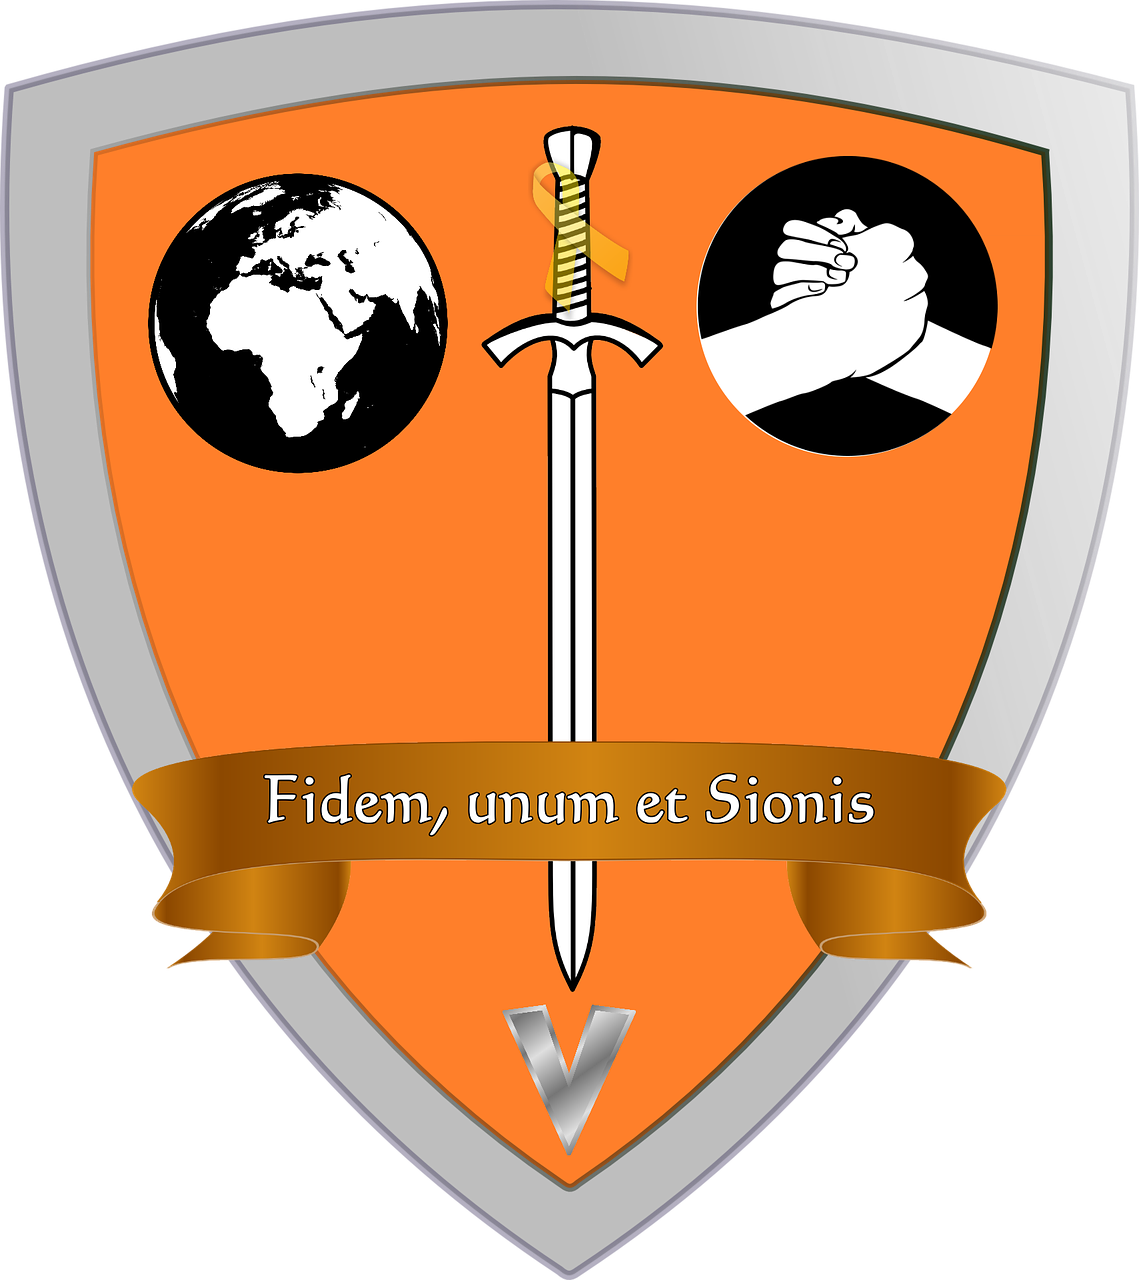 coat of arms solidarity military free photo